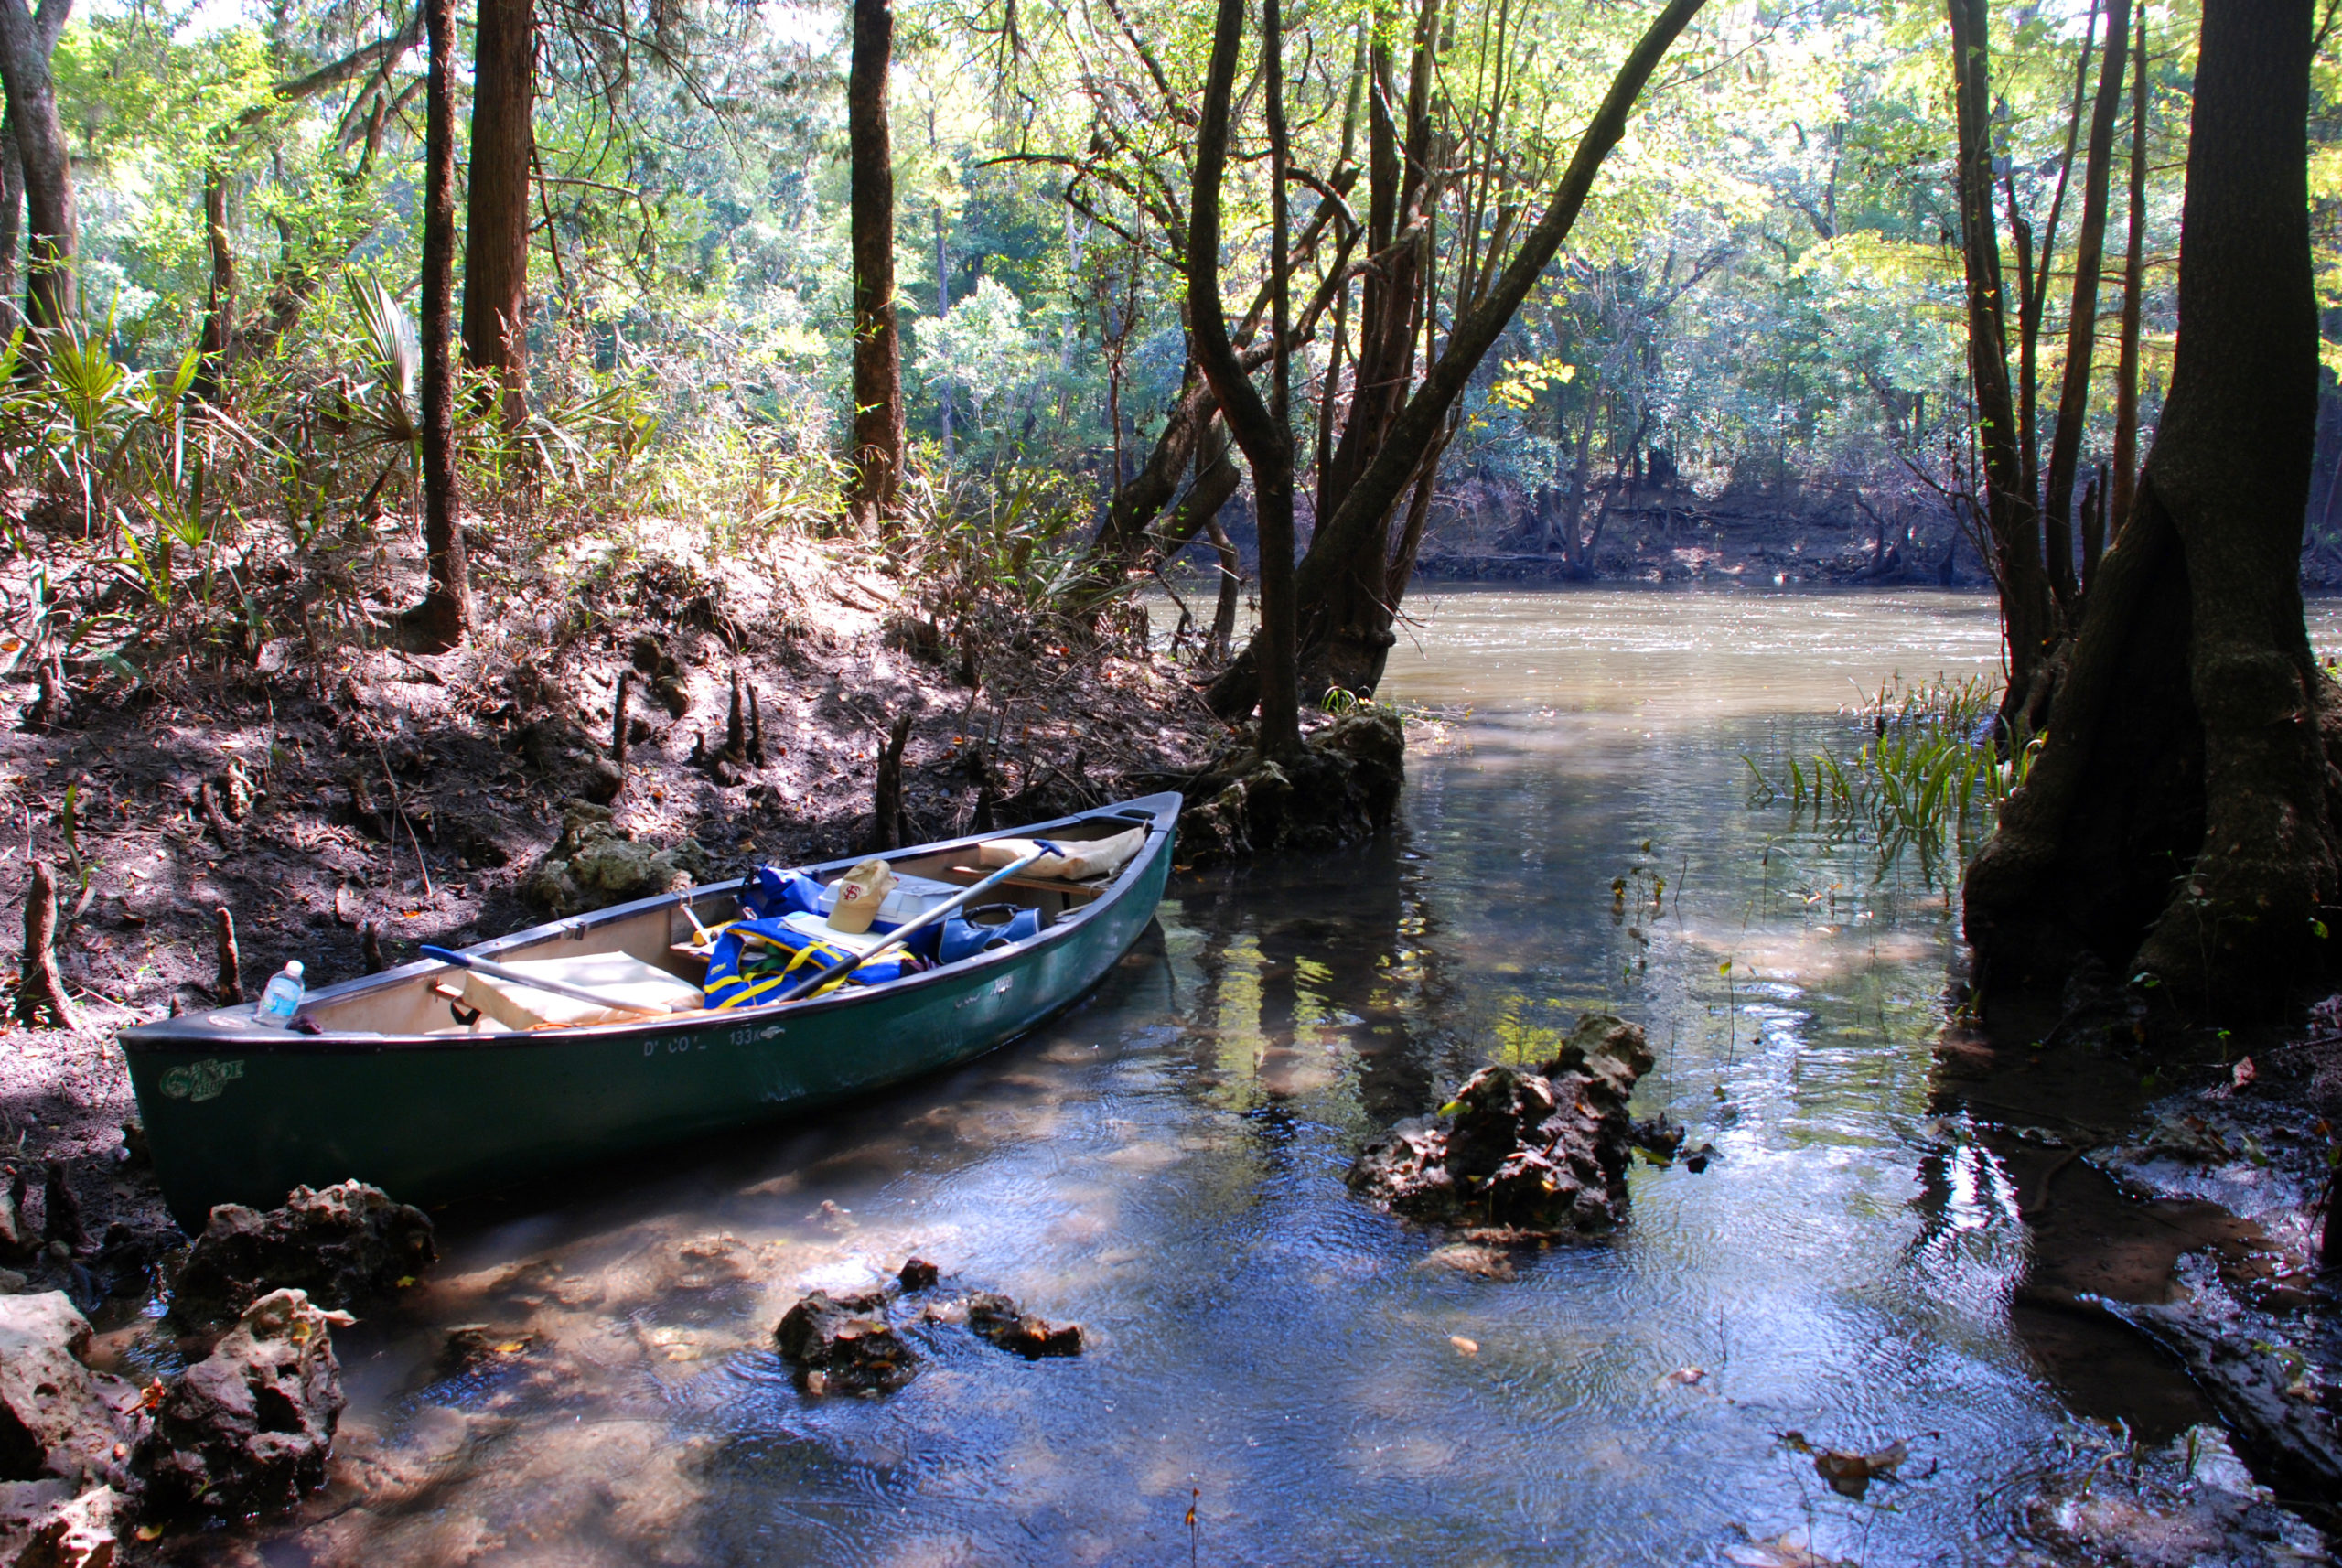 Choose Your Own Adventure in Northwest Florida